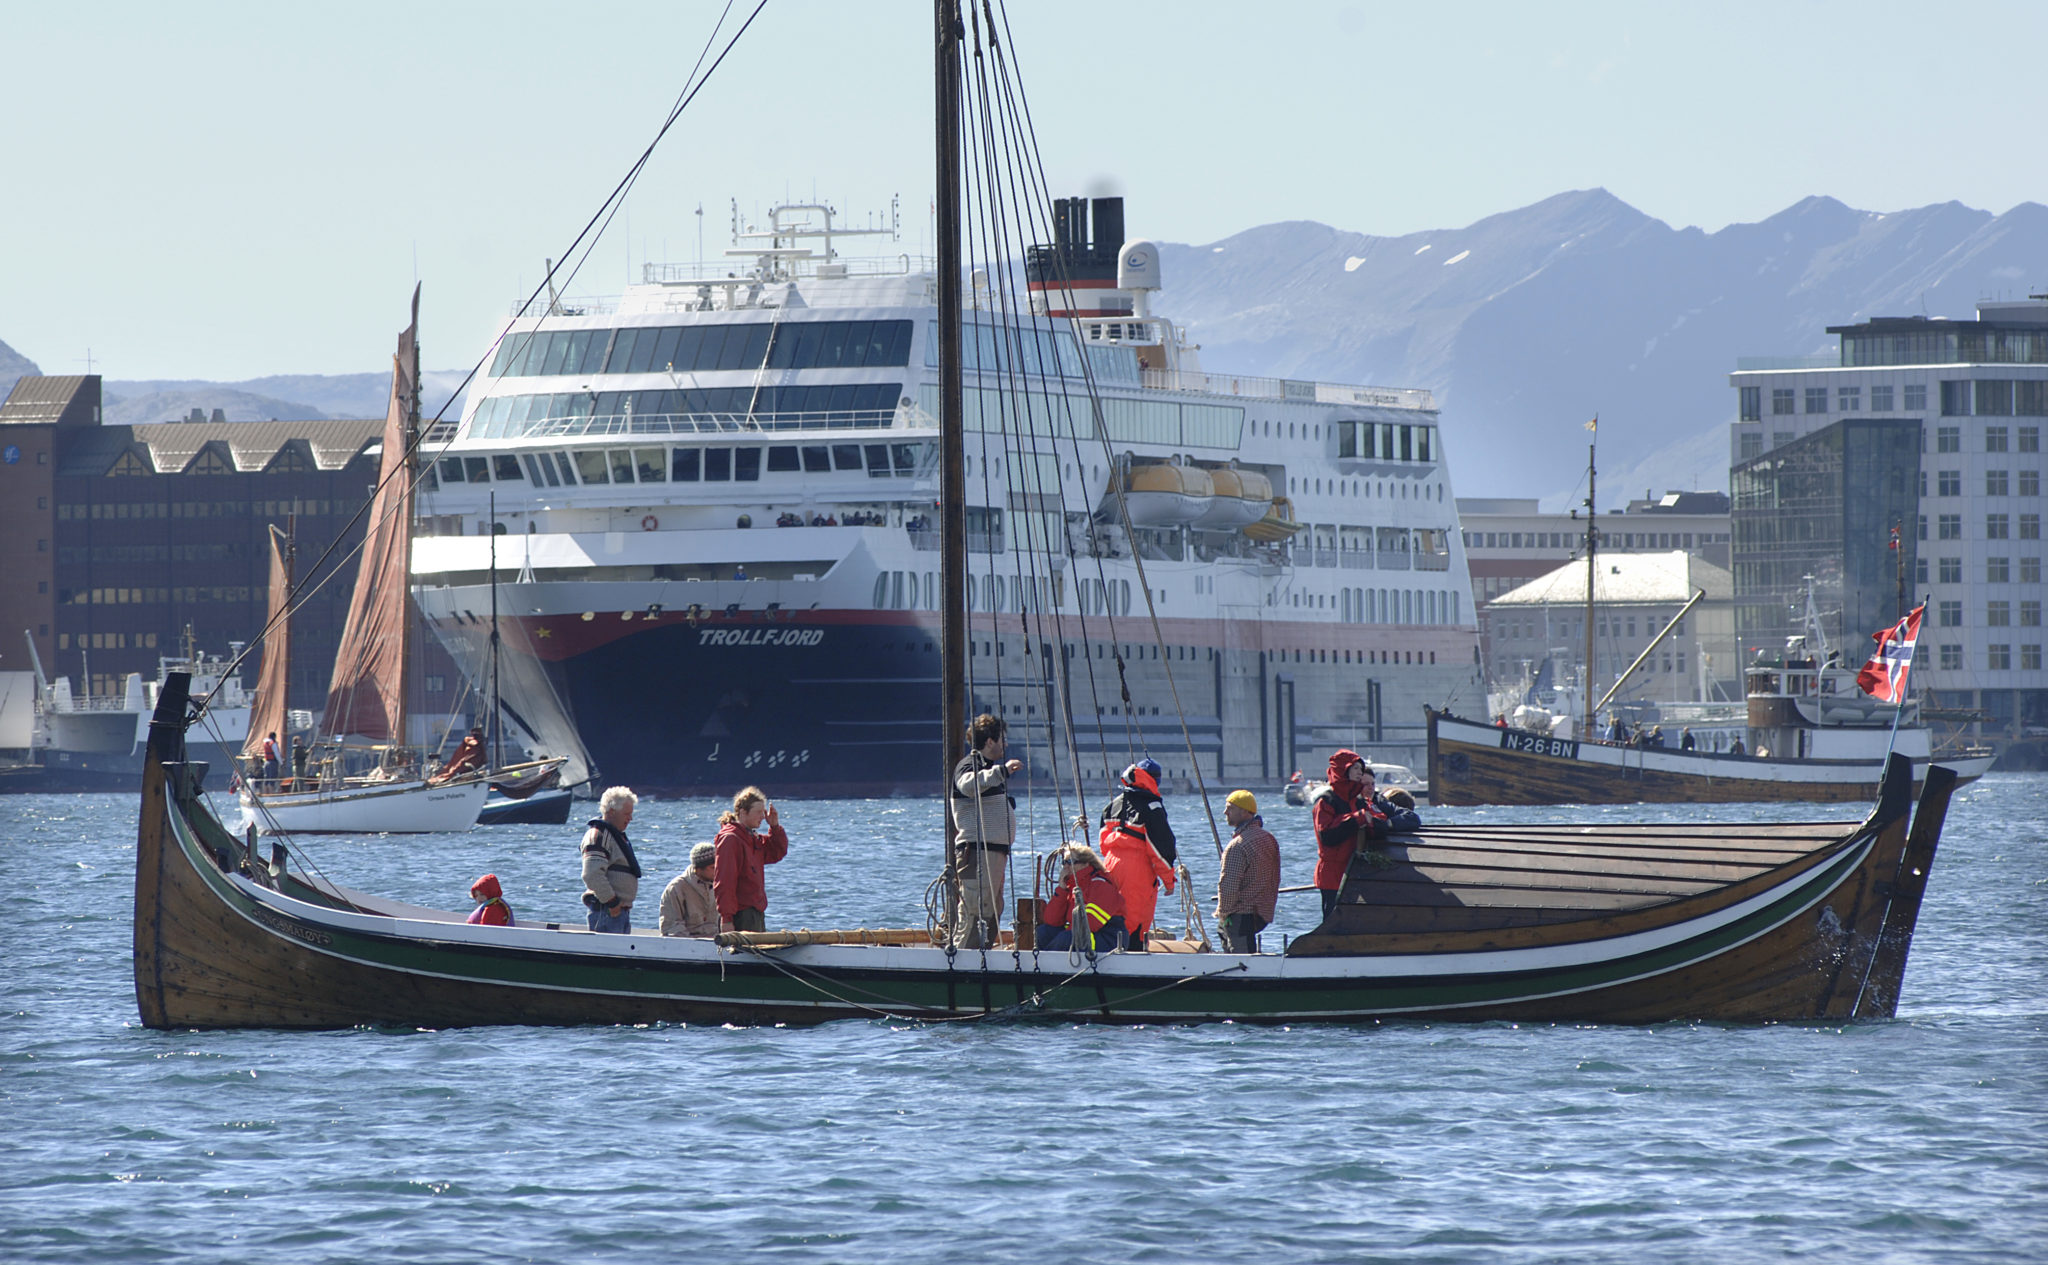 A Nordland Boat making its wayalong the coast of Bodø, with the Hurtigruten boat nearby © Ernst Furuhatt